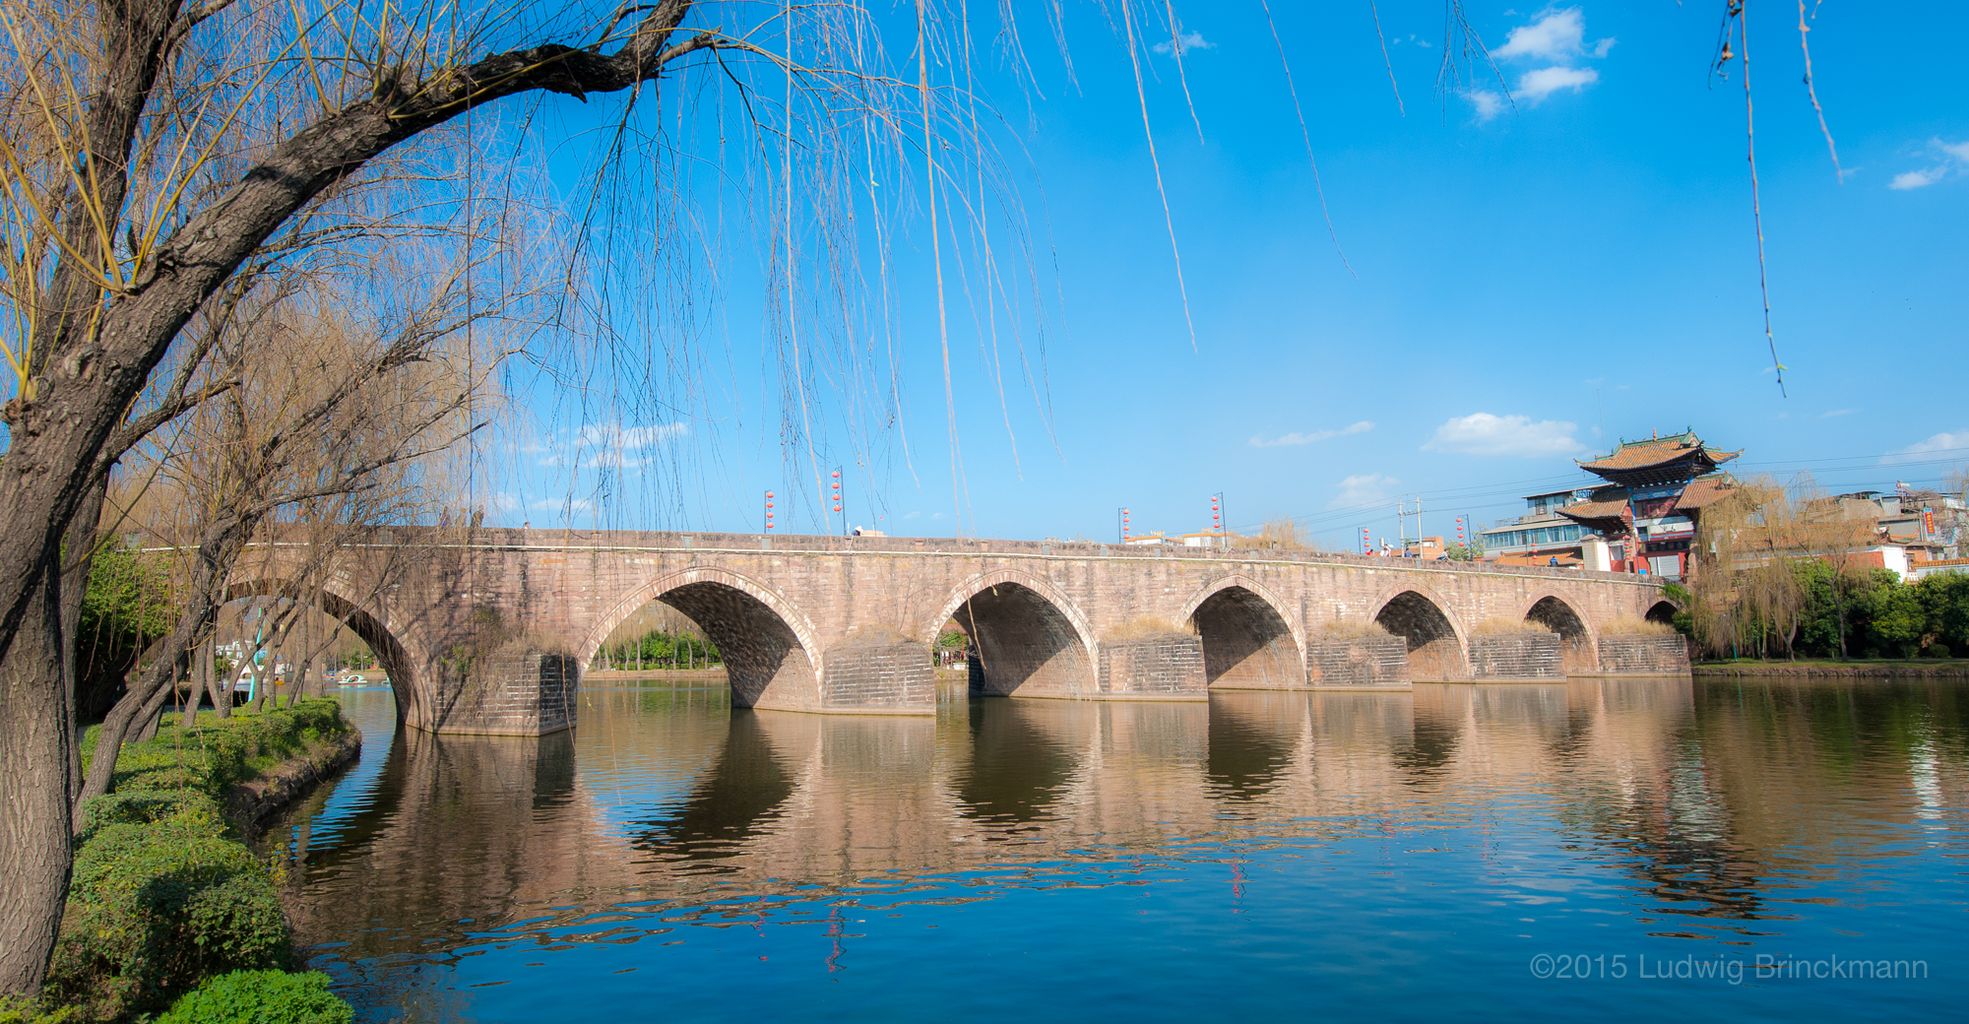 Picture: The main crossing of the Luyi River 禄衣河, one of the lowest points on the Kunming-Dali road, gave rise to what is today Lufeng Town. The Xingsu Bridge 星宿桥, build during the late Qing, still stands today, void of traffic in a park in Lufeng.